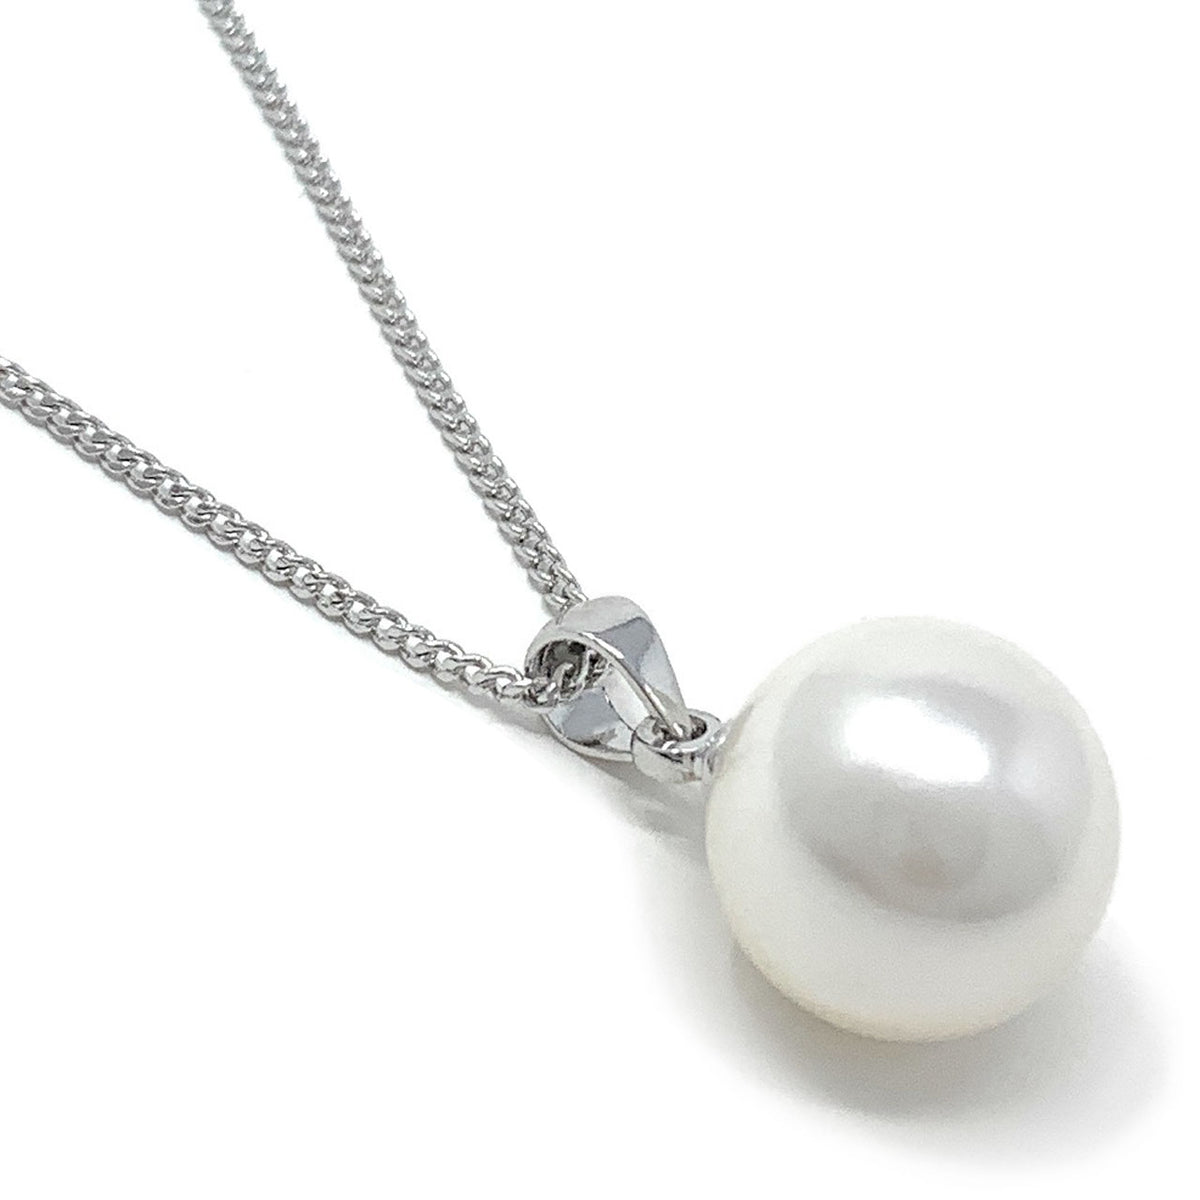 Elizabeth Pendant Necklace with Ivory White Round Pearls from Swarovski Silver Toned Rhodium Plated - Ed Heart